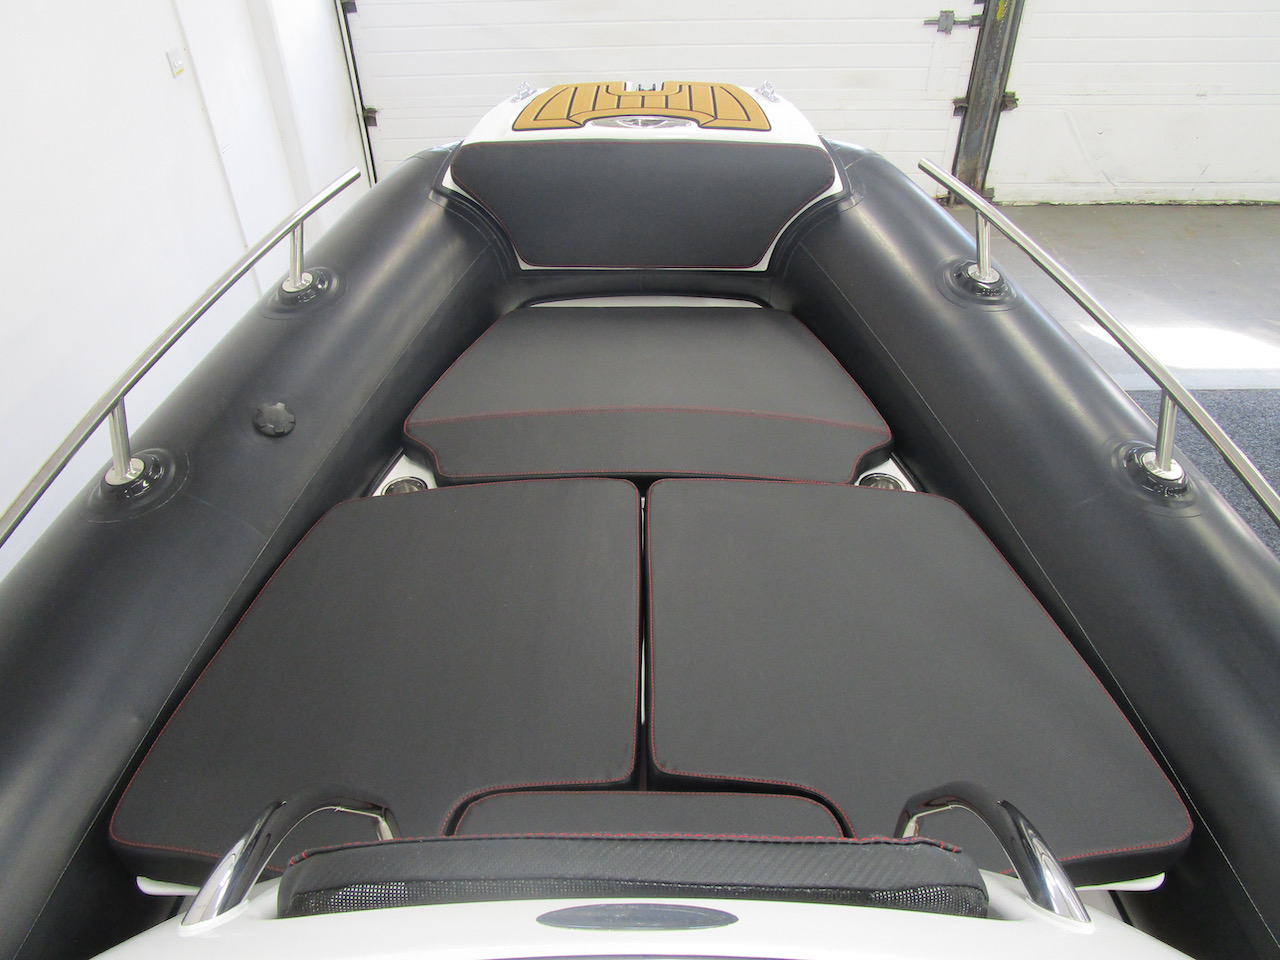 Grand RIB Golden Line G650 complete sundeck with cushions fitted